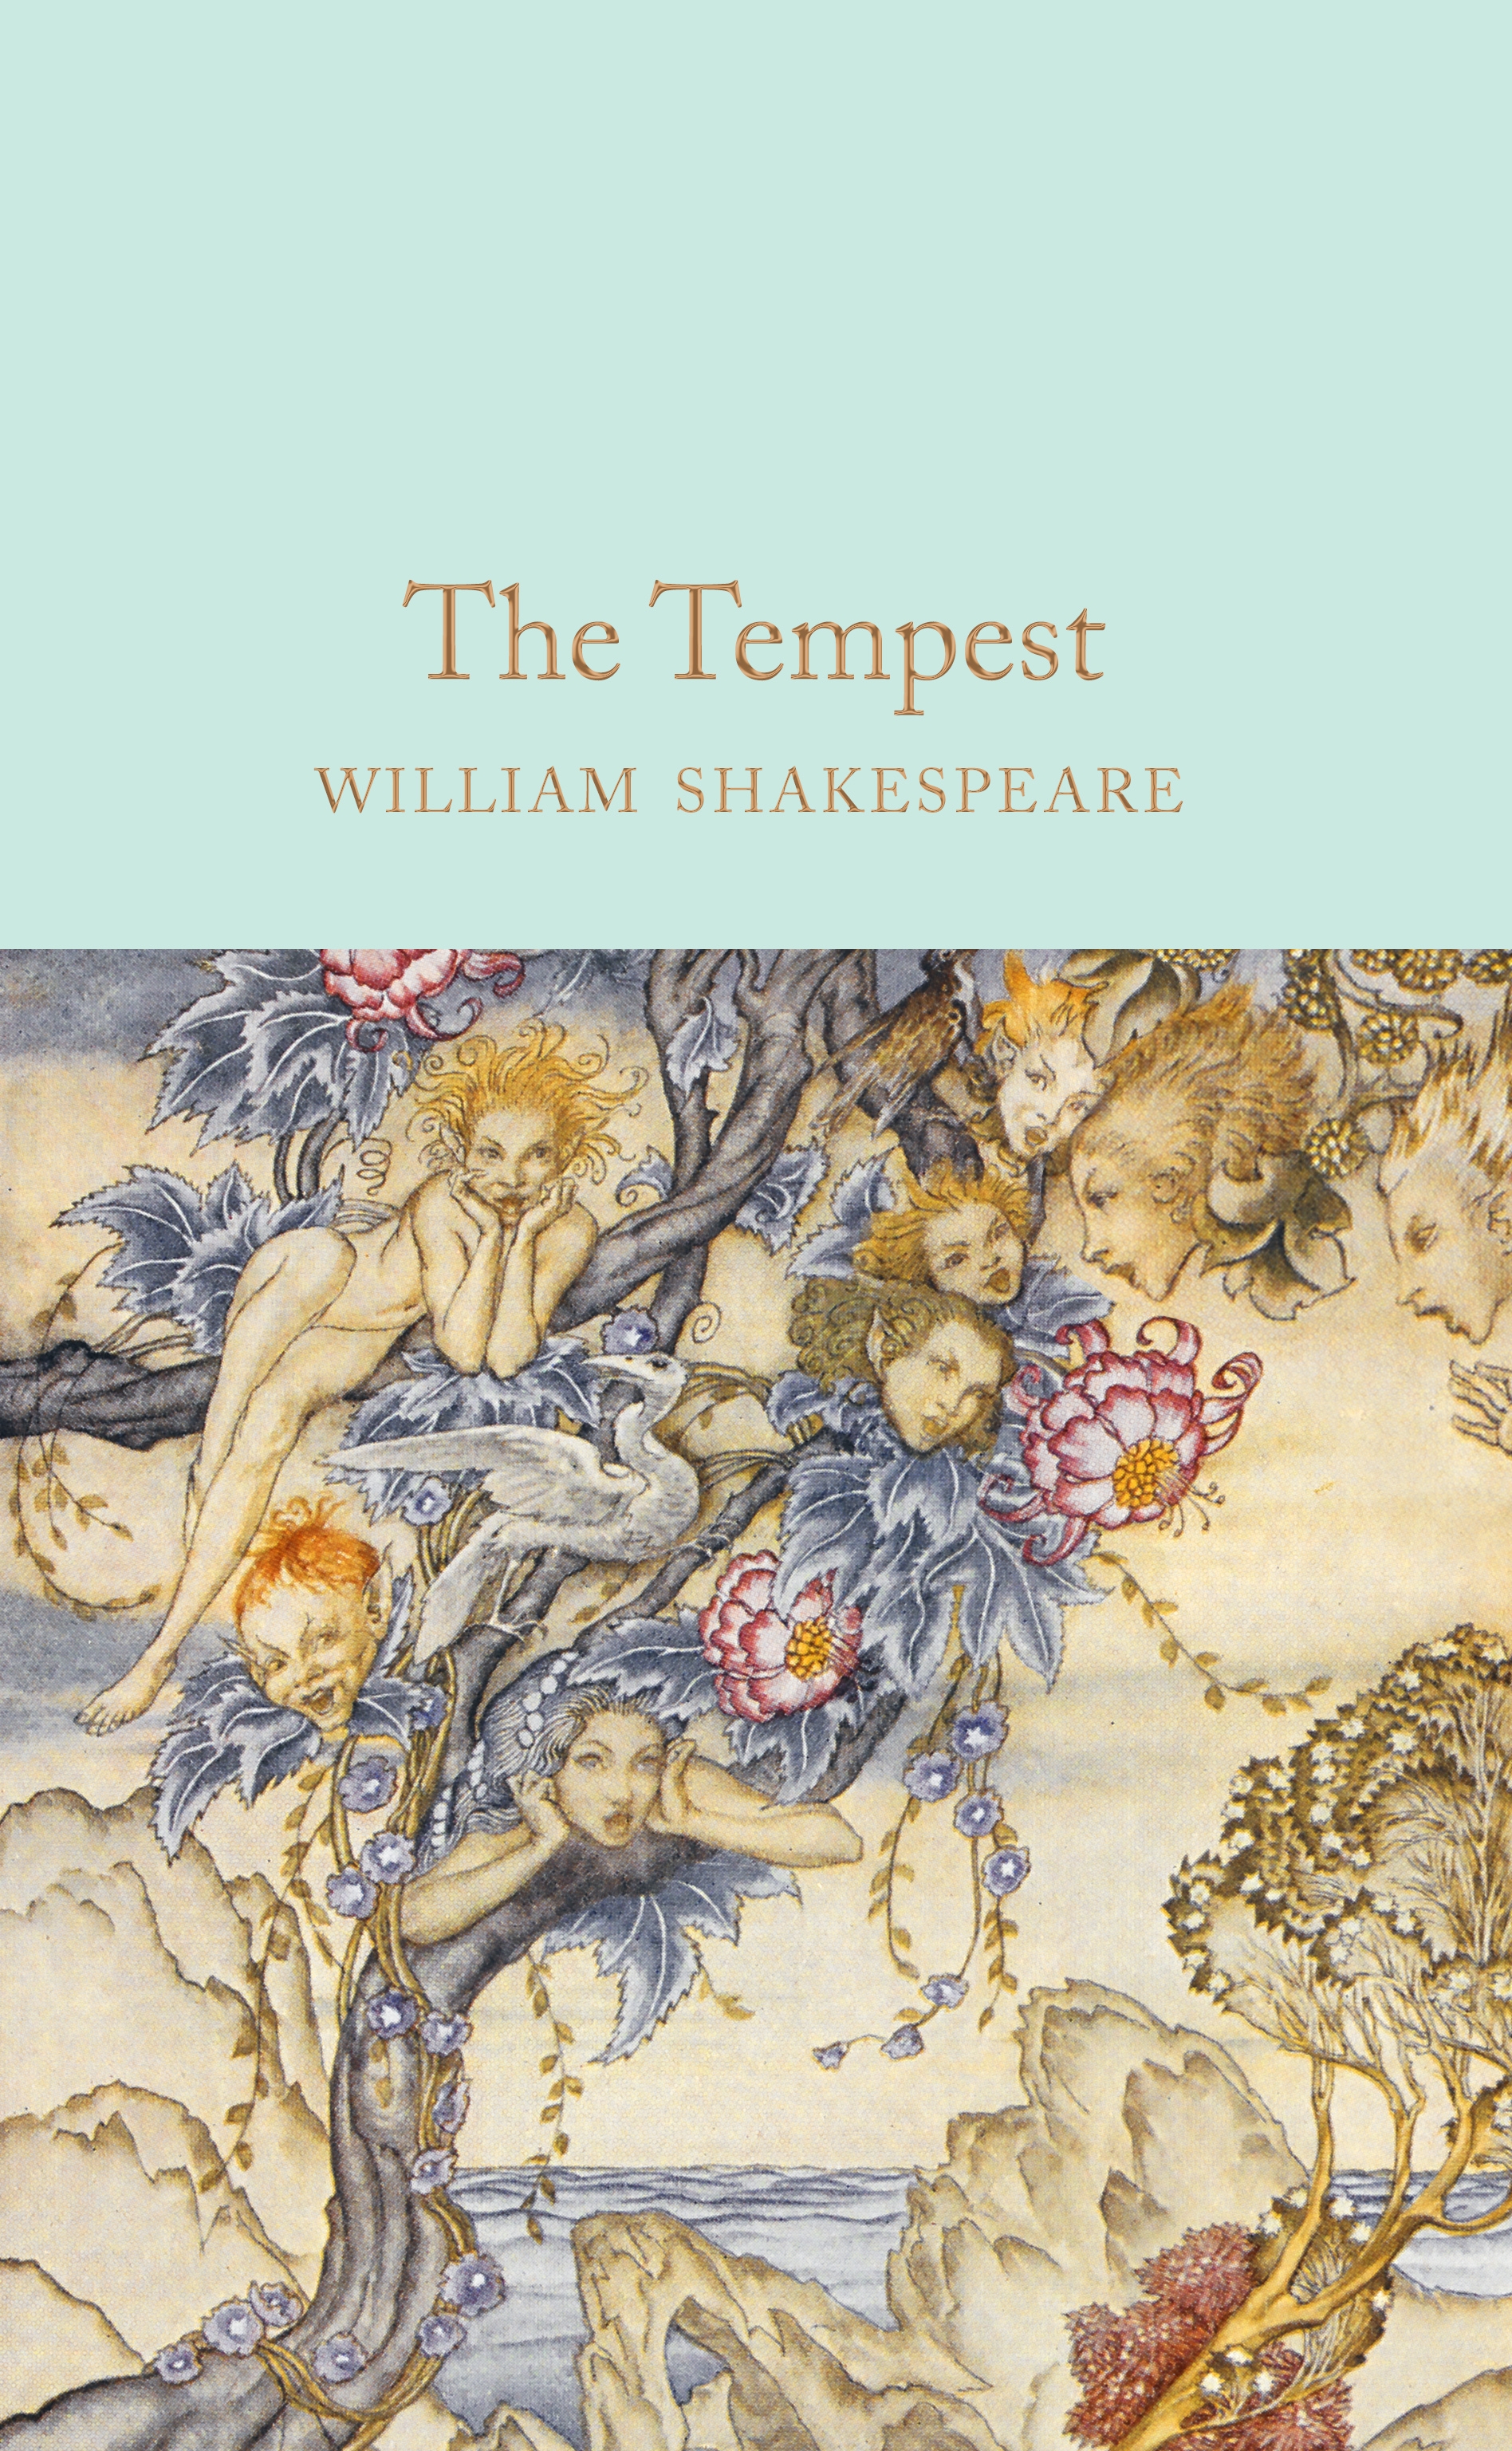 Book “The Tempest” by William Shakespeare — June 18, 2019